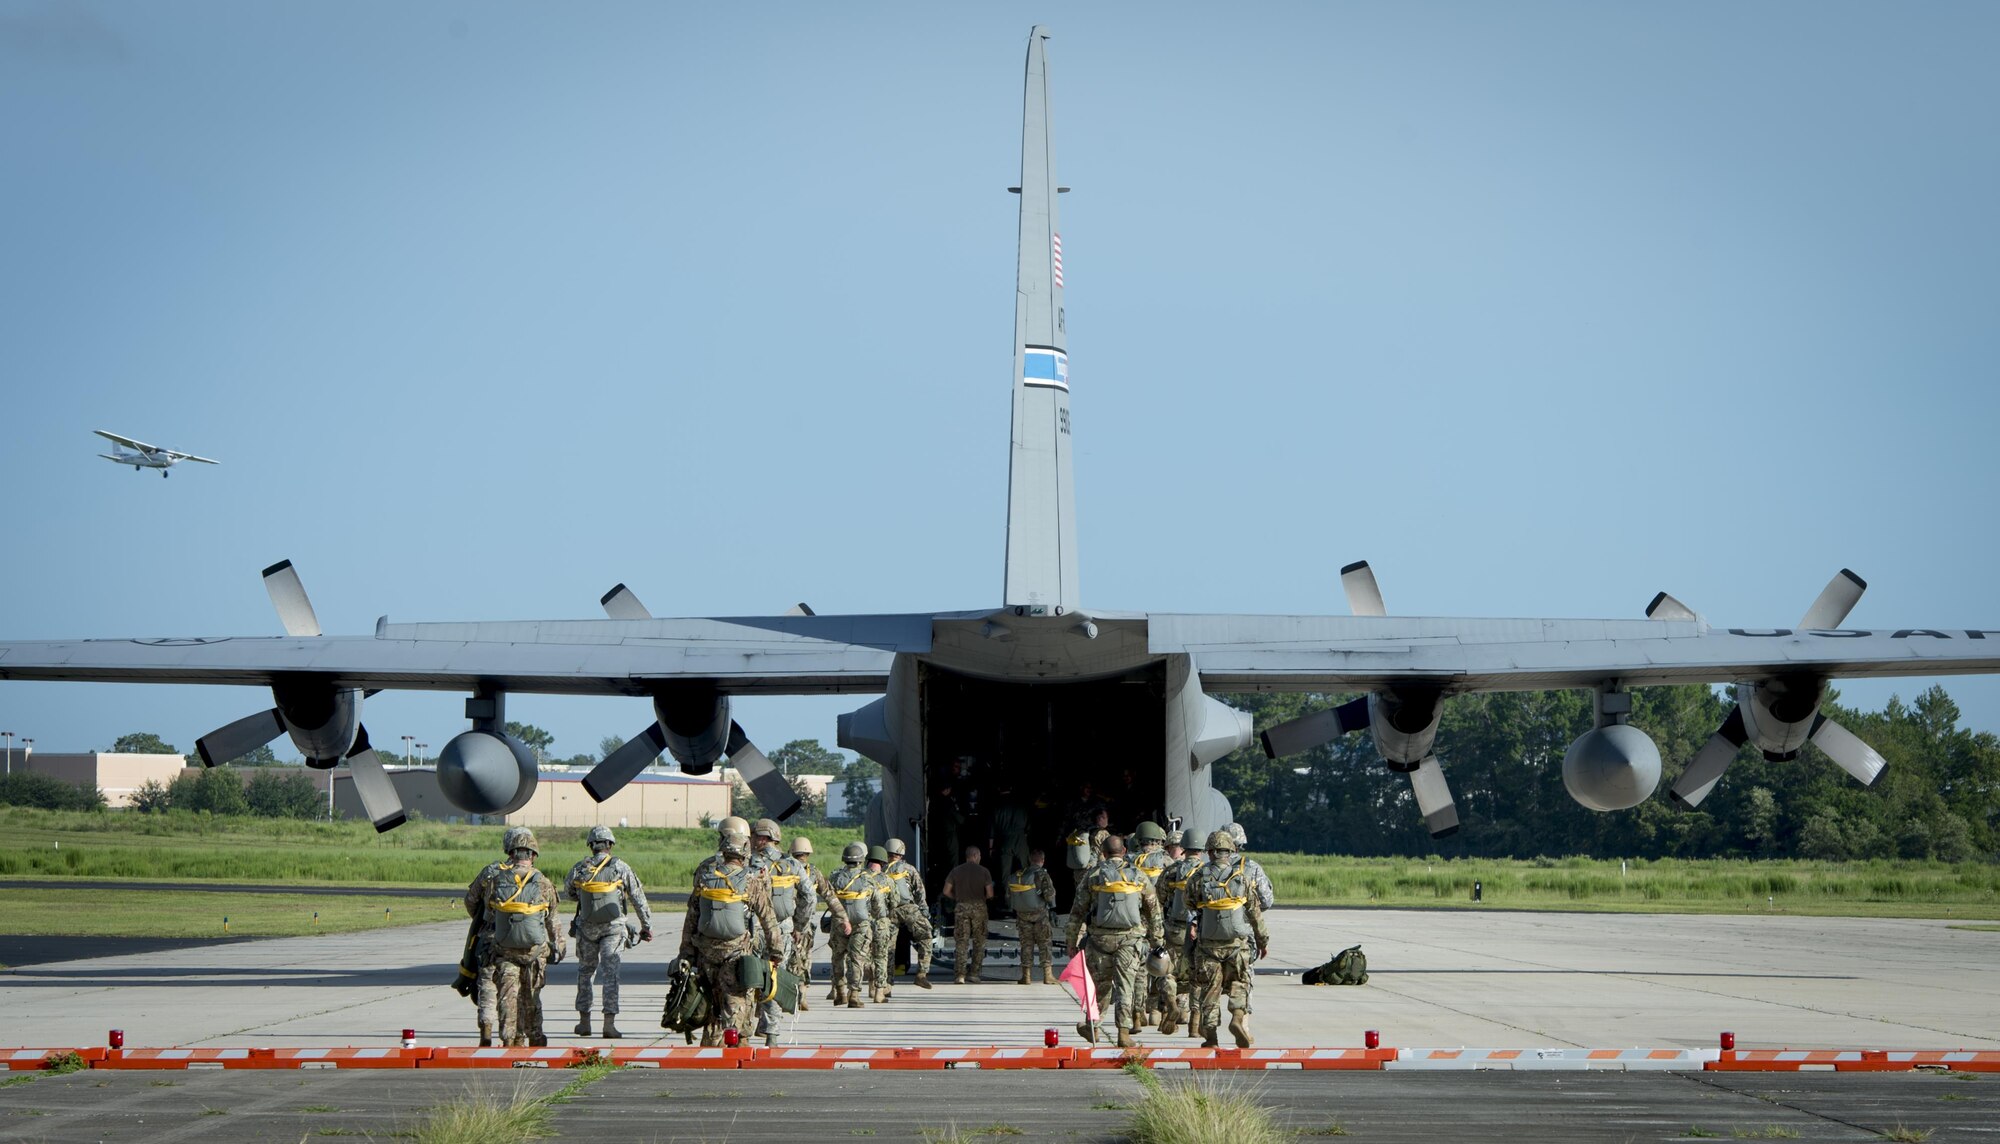 Service members from MacDill Air Force Base, Fla., load into a C-130 Hercules aircraft before their flight in Brooksville, Fla., July 15, 2017. Airborne service members must jump every three months to remain qualified. (U.S. Air Force photo by Senior Airmen Mariette Adams)